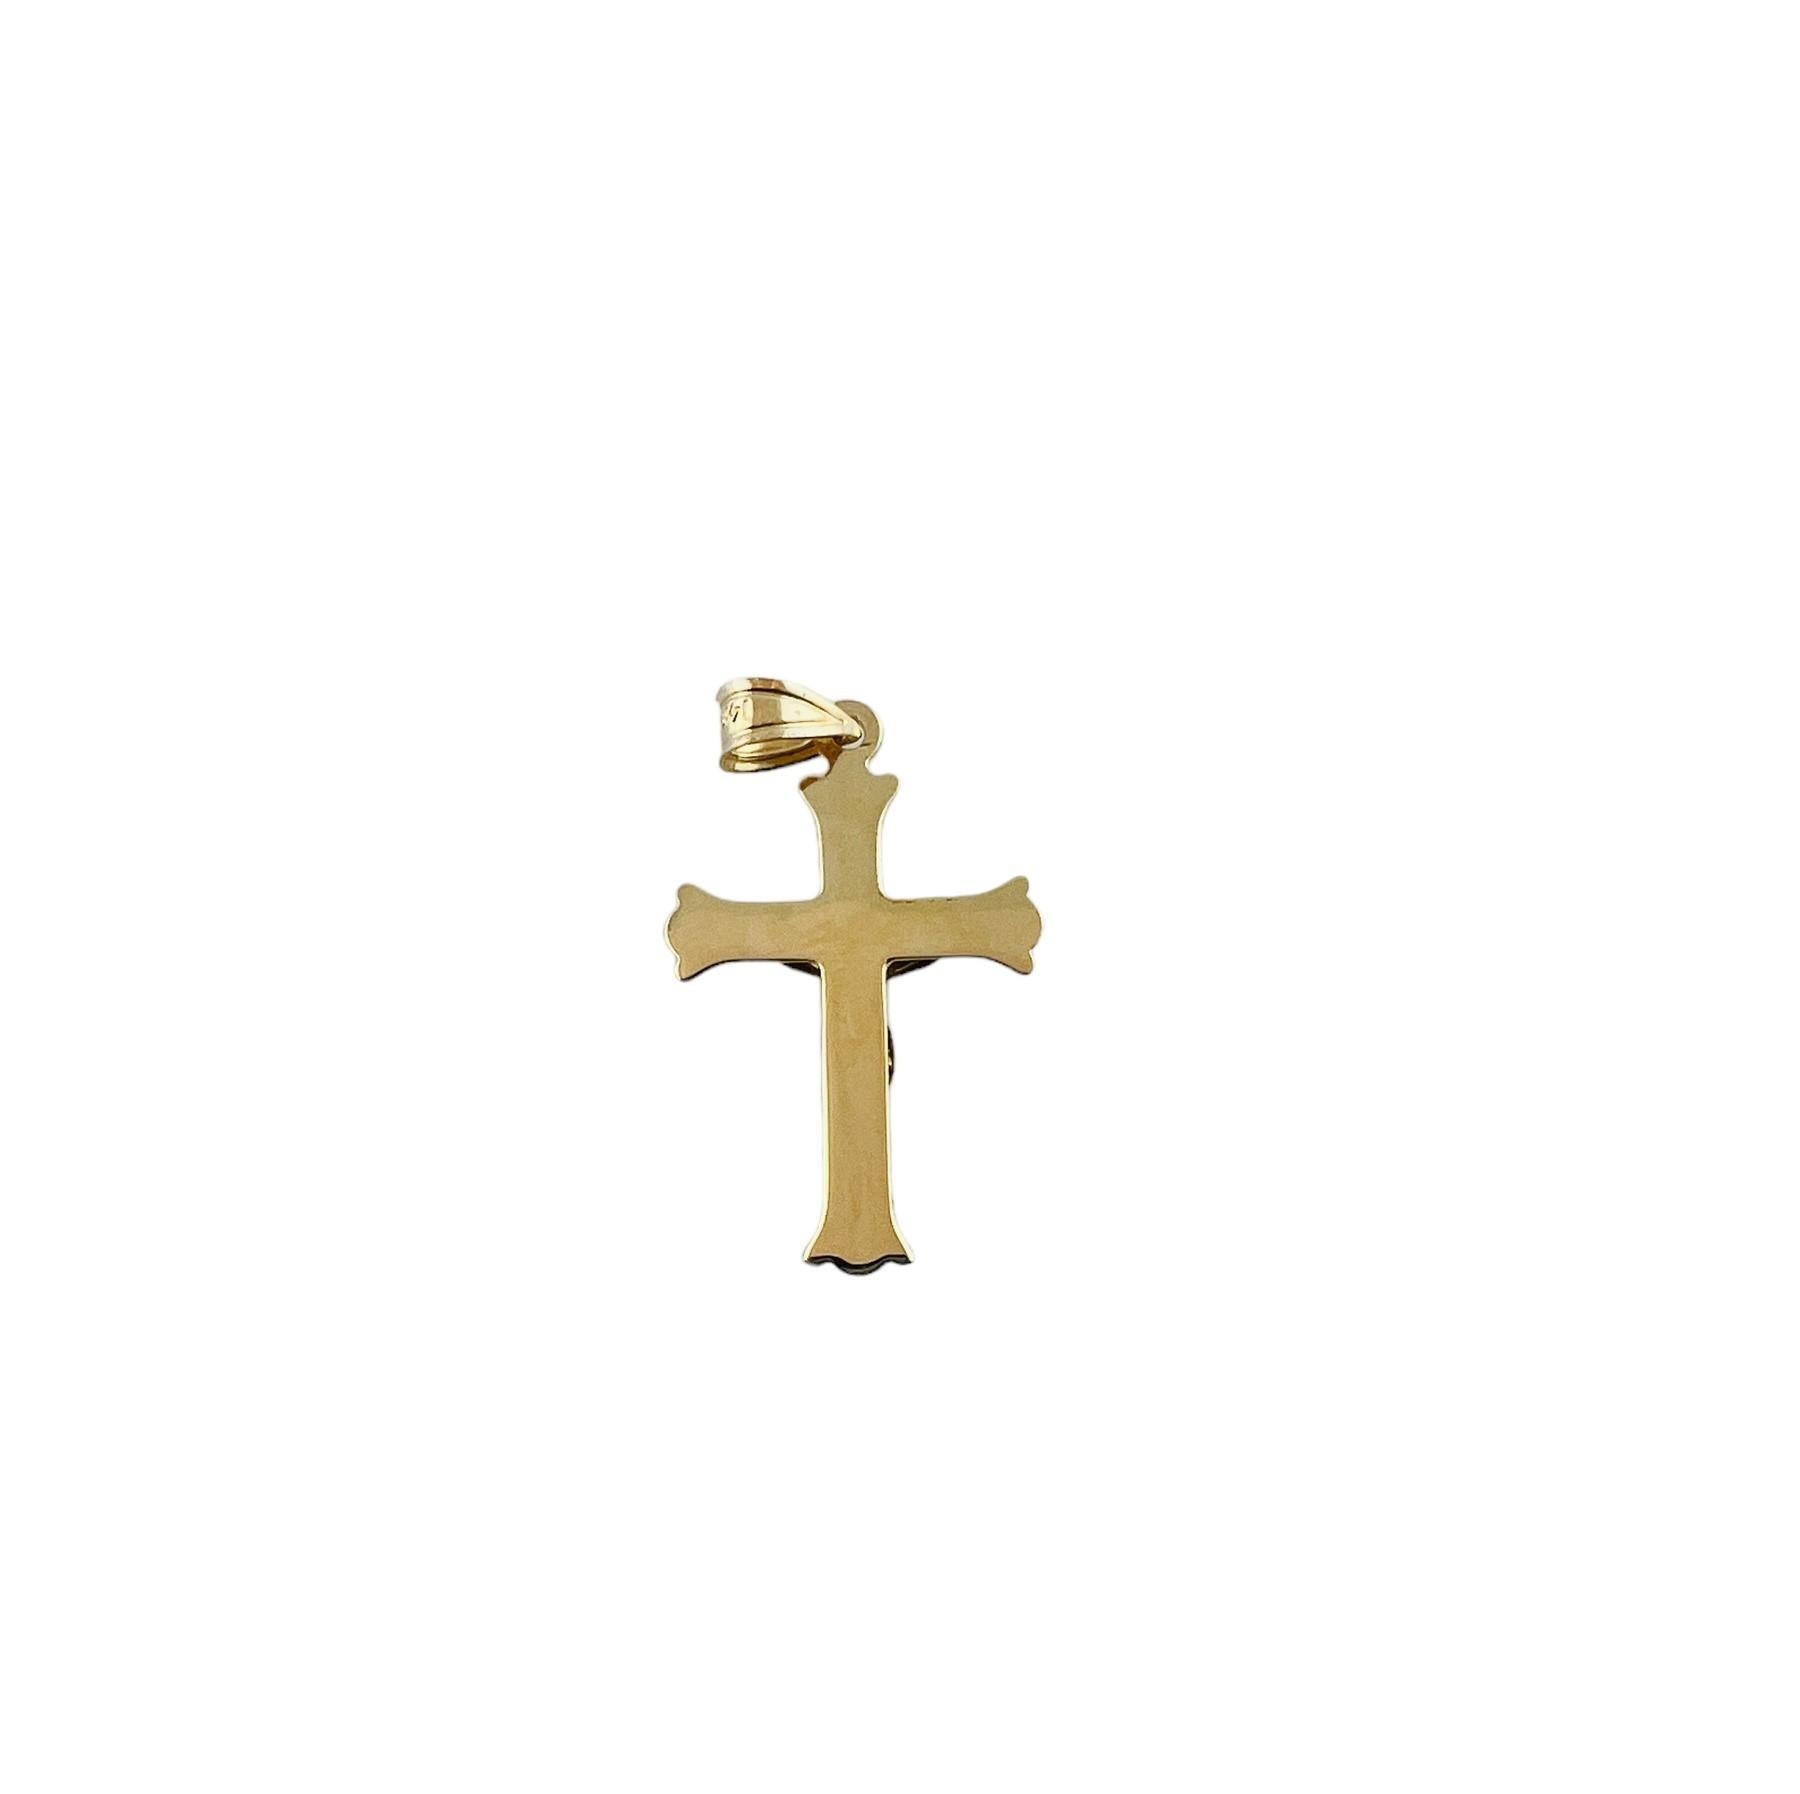 14K Two Toned Gold Crucifix Pendant

This crucifix has a cross set in 14K Yellow gold with Jesus in 14K white gold

Pendant measures approx. 36.1 mm x 19.0 mm x 3.2 mm

1.0 grams / 0.6 dwt

Stamped 14K MA

*Does not come with chain*

Very good